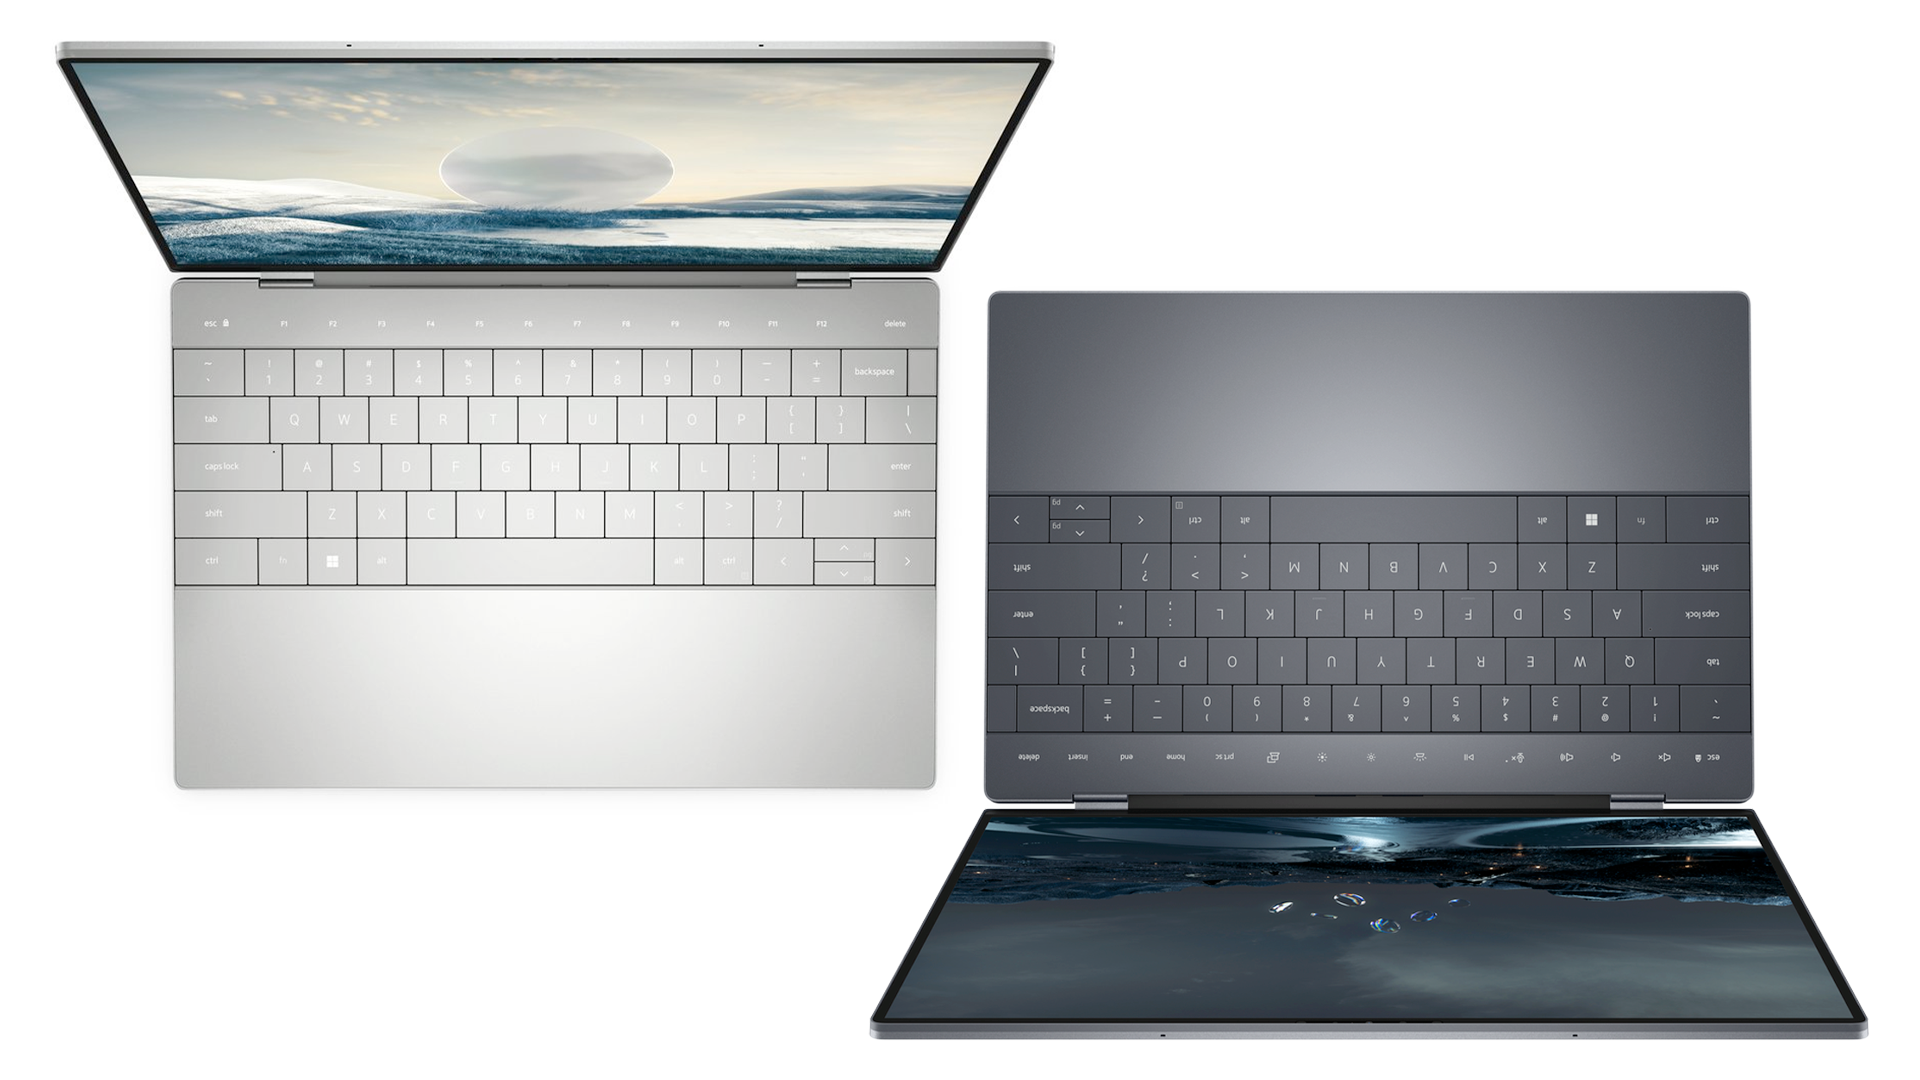 The Dell XPS 13 Plus in black and white colorways